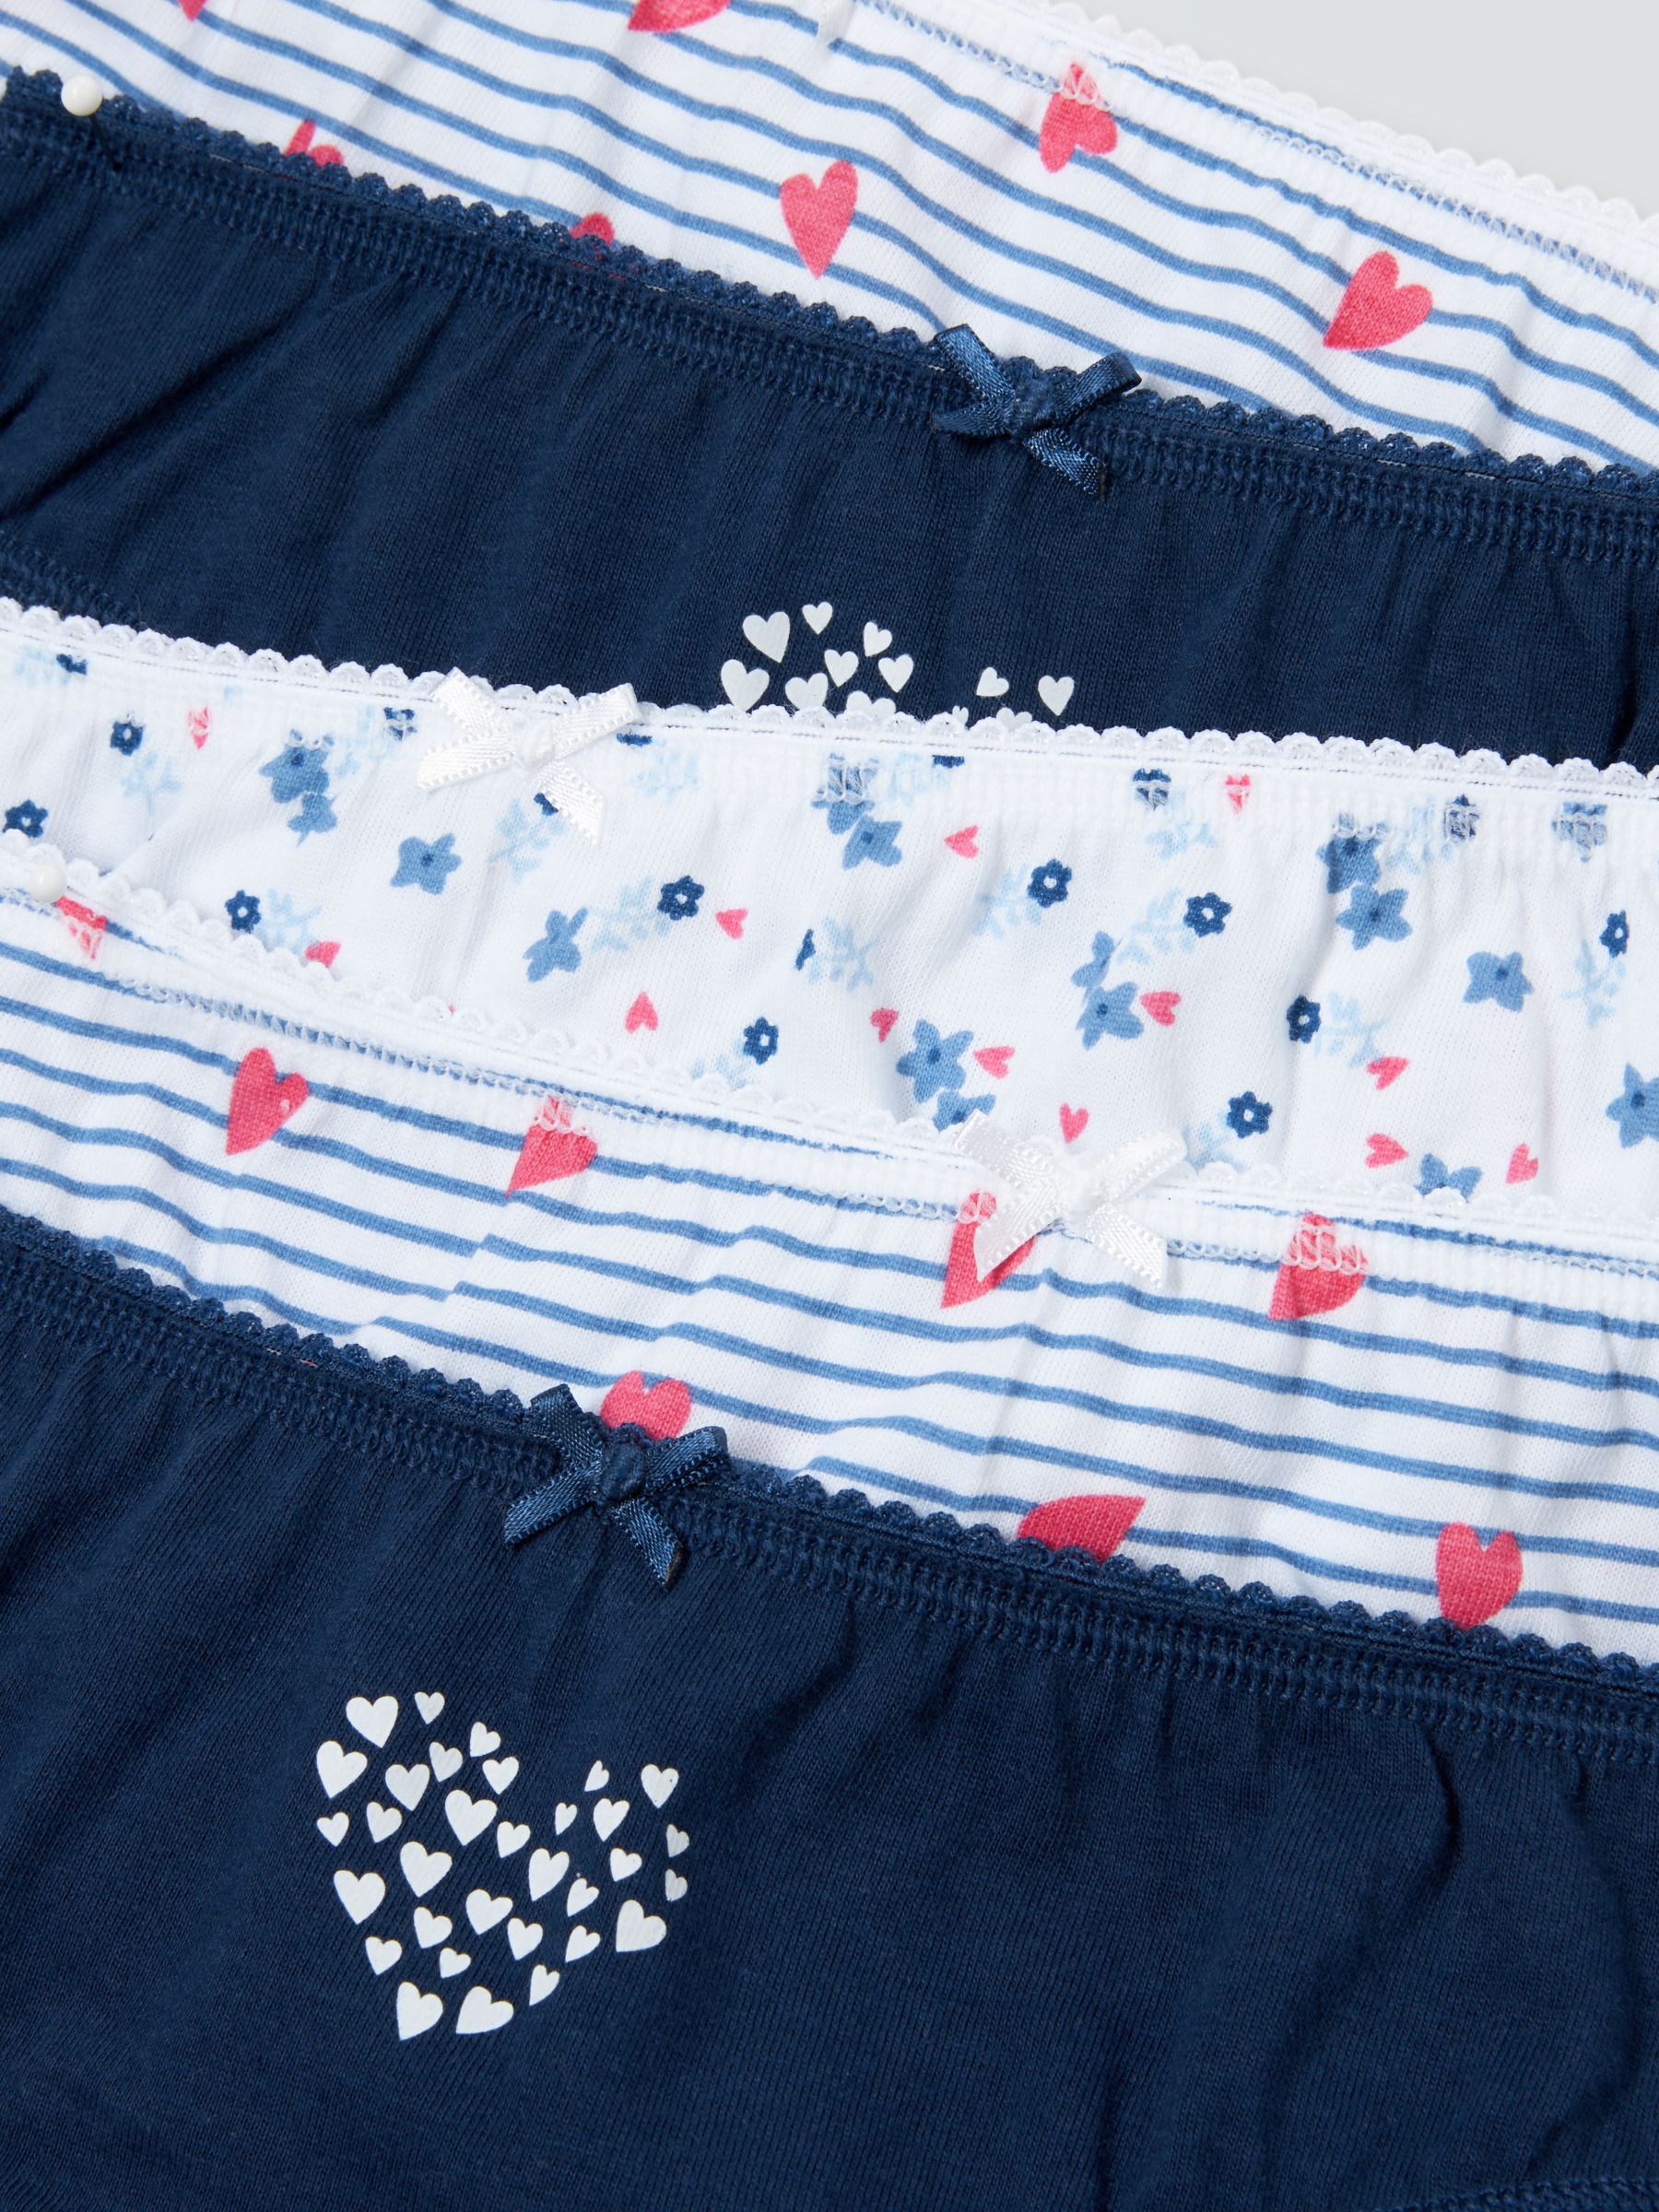 John Lewis Kids' French Heart Briefs, Pack of 5, Navy/Multi, 3-4 years